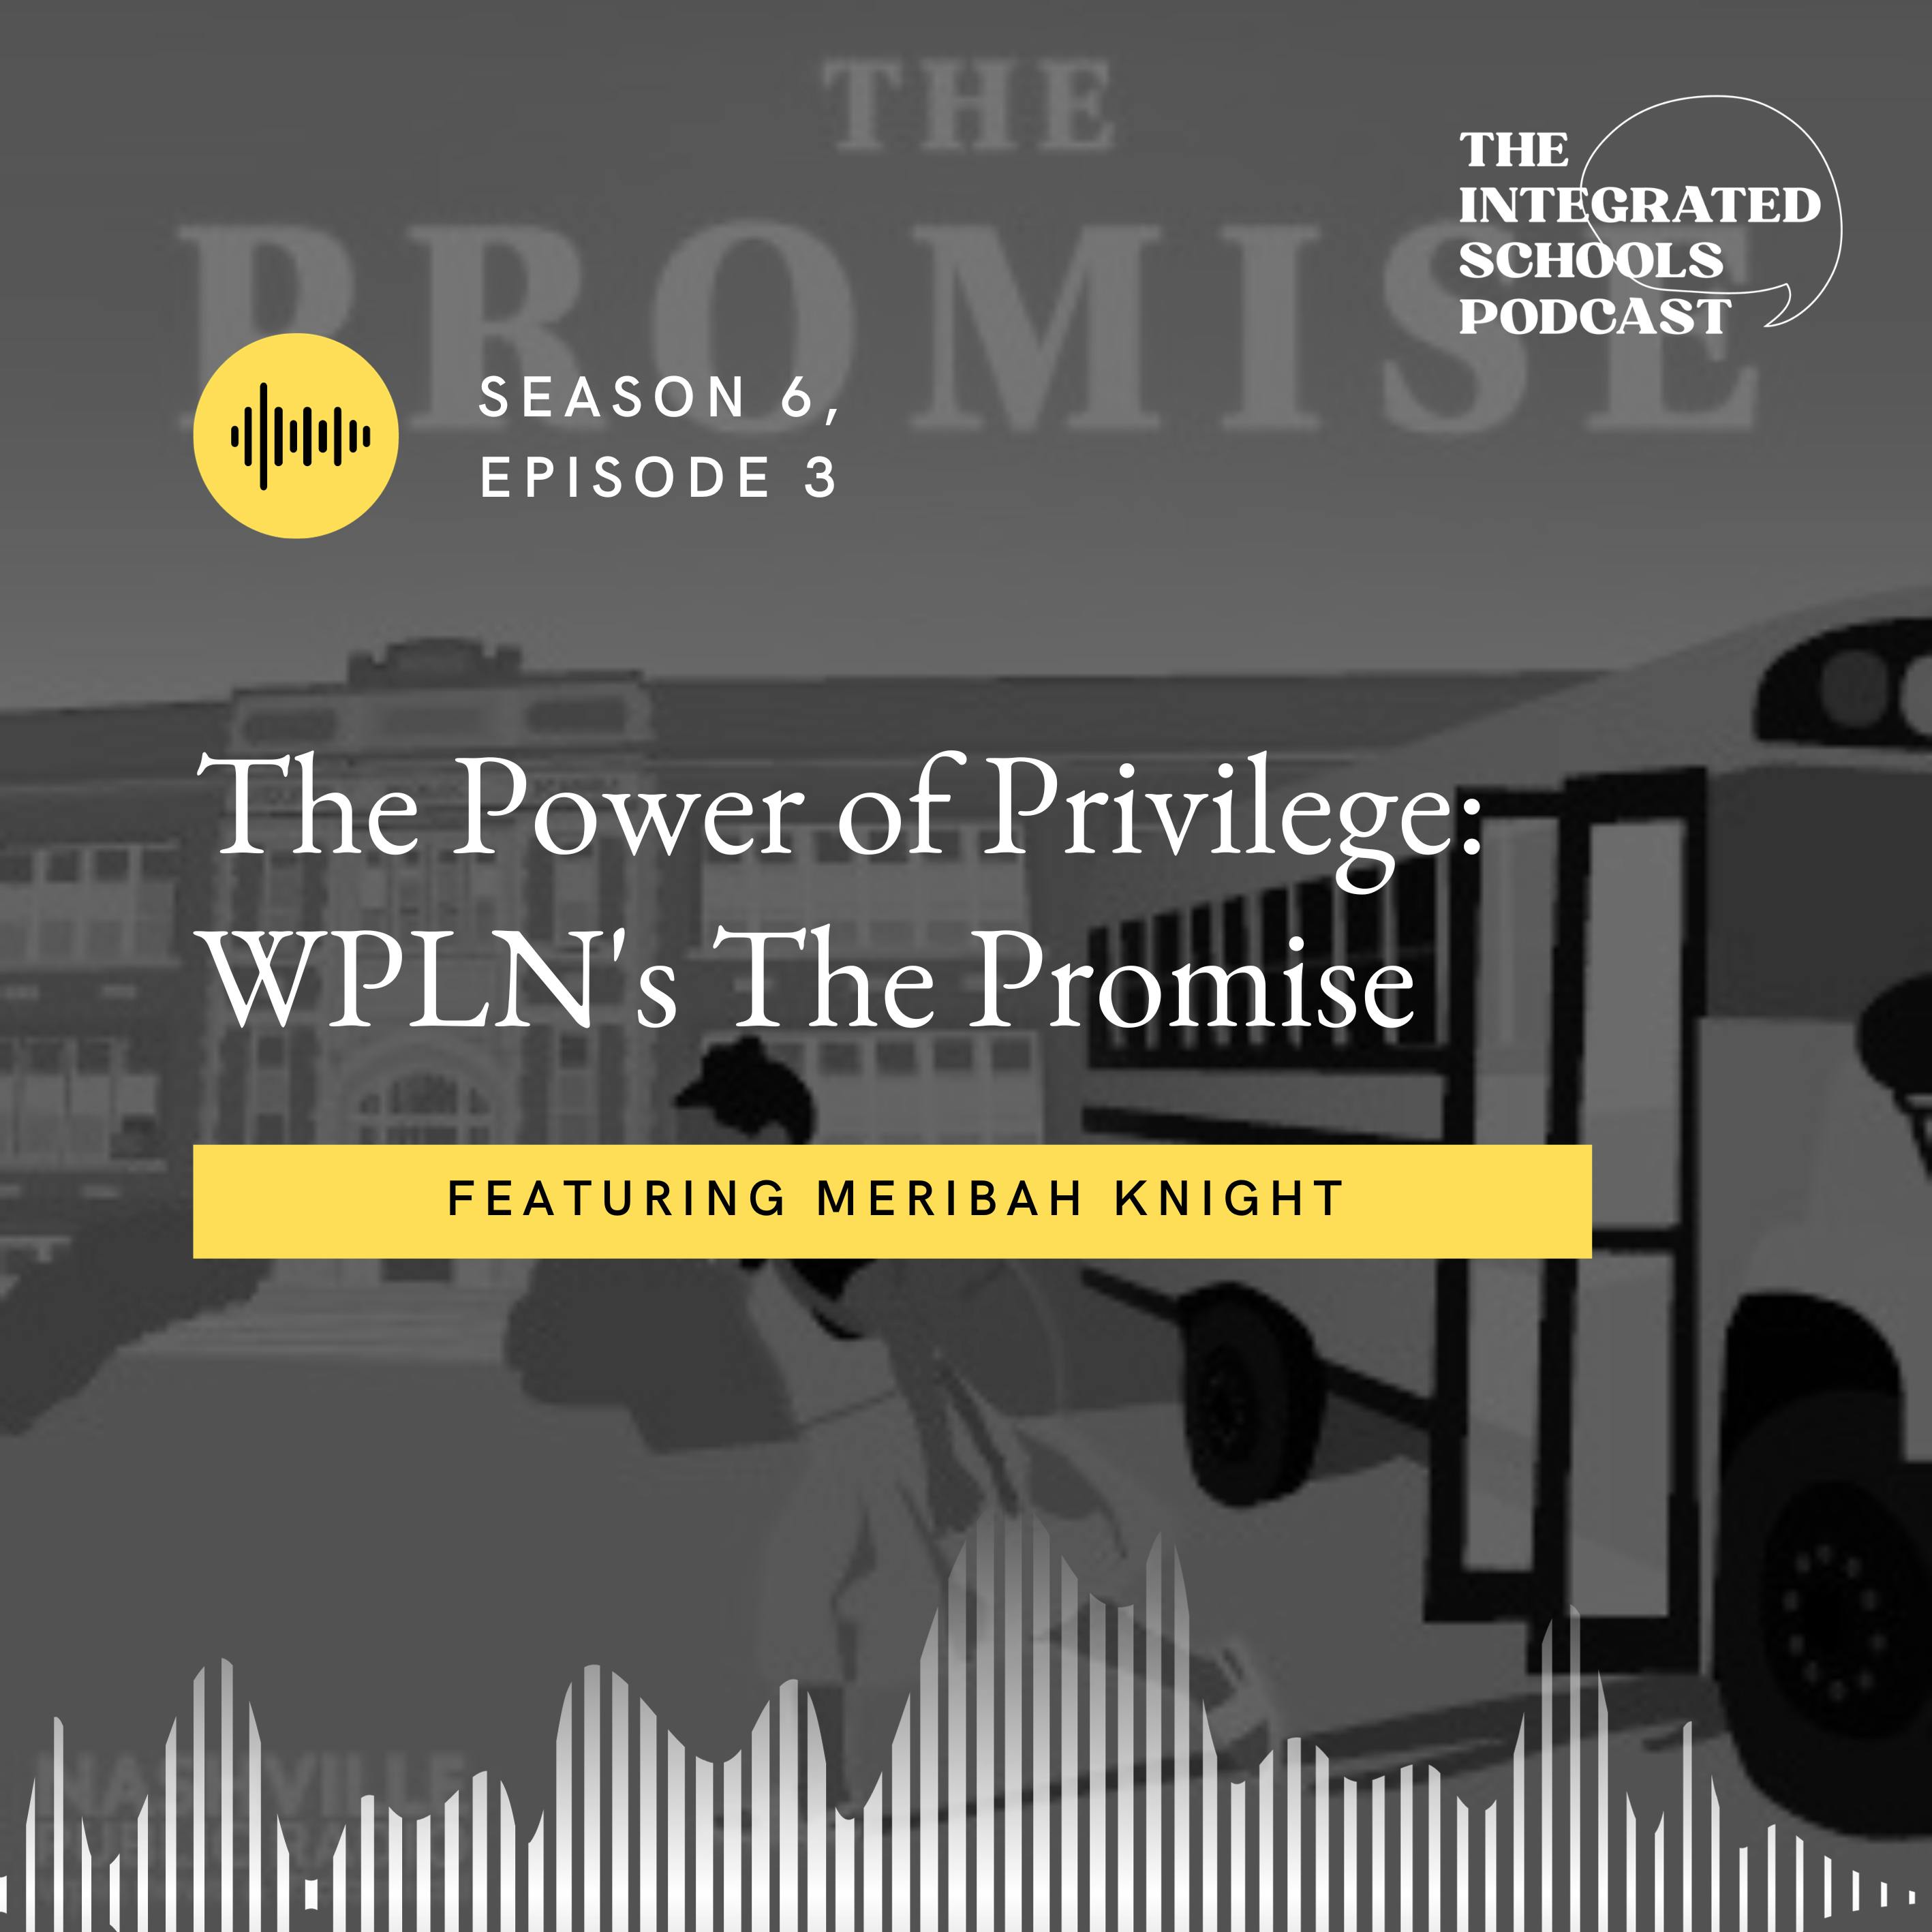 The Power of Privilege: WPLN's The Promise